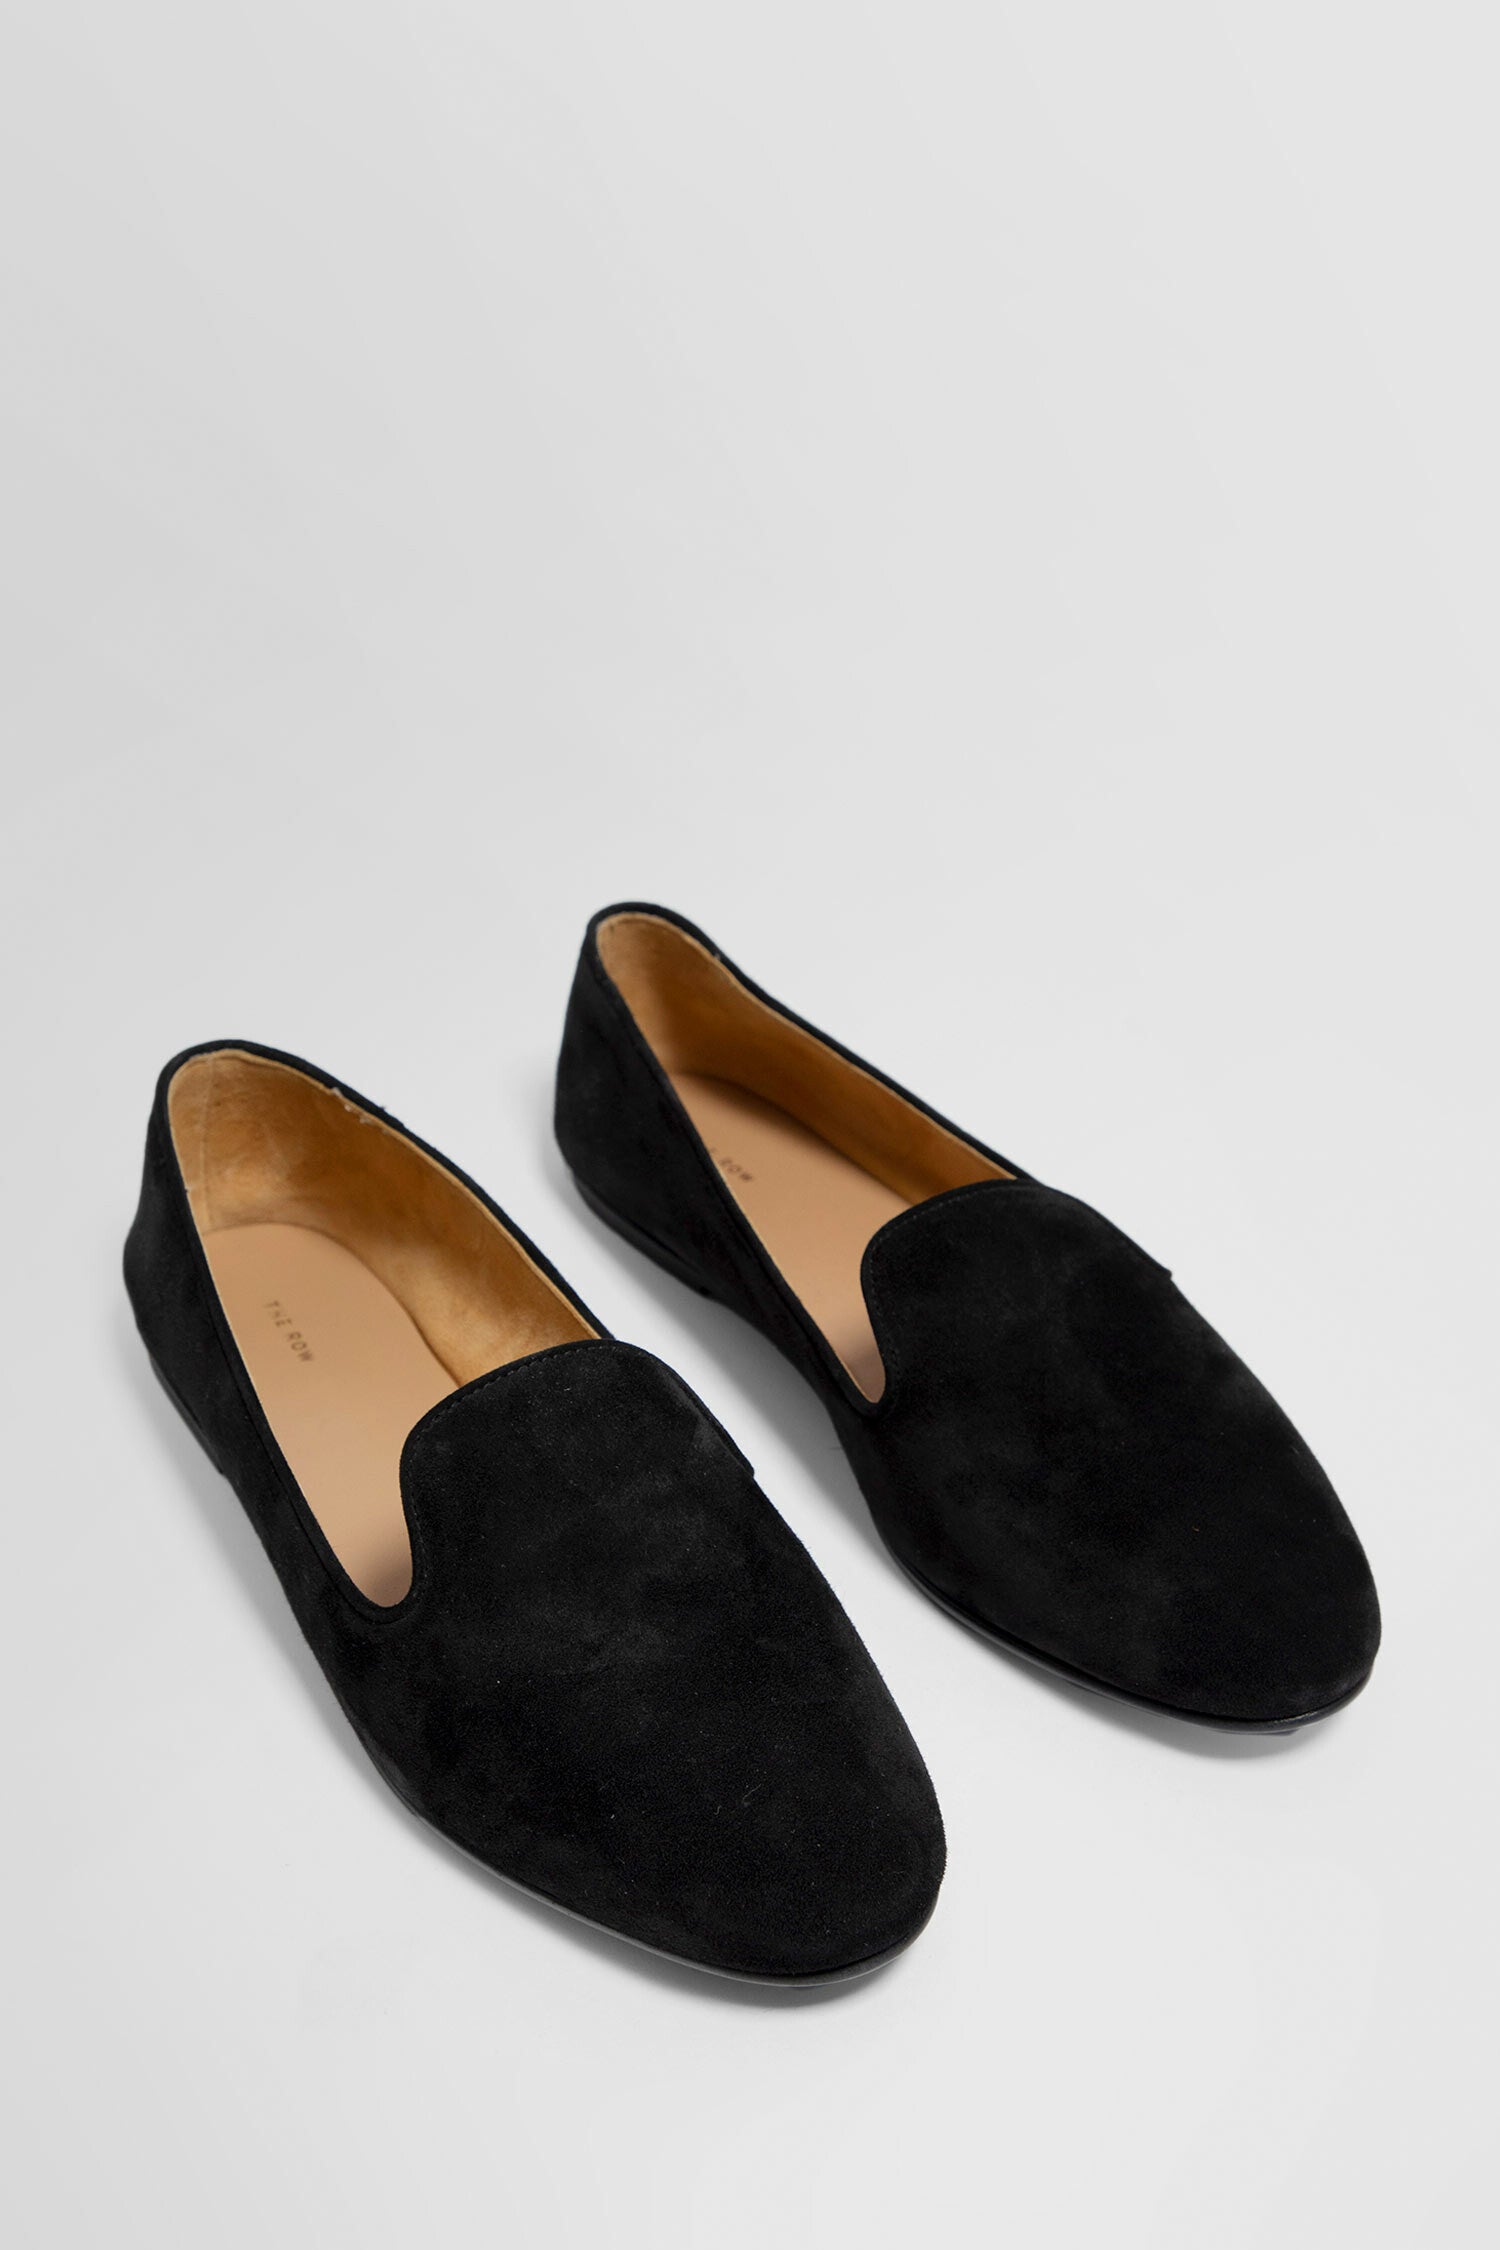 THE ROW MAN BLACK LOAFERS & FLATS